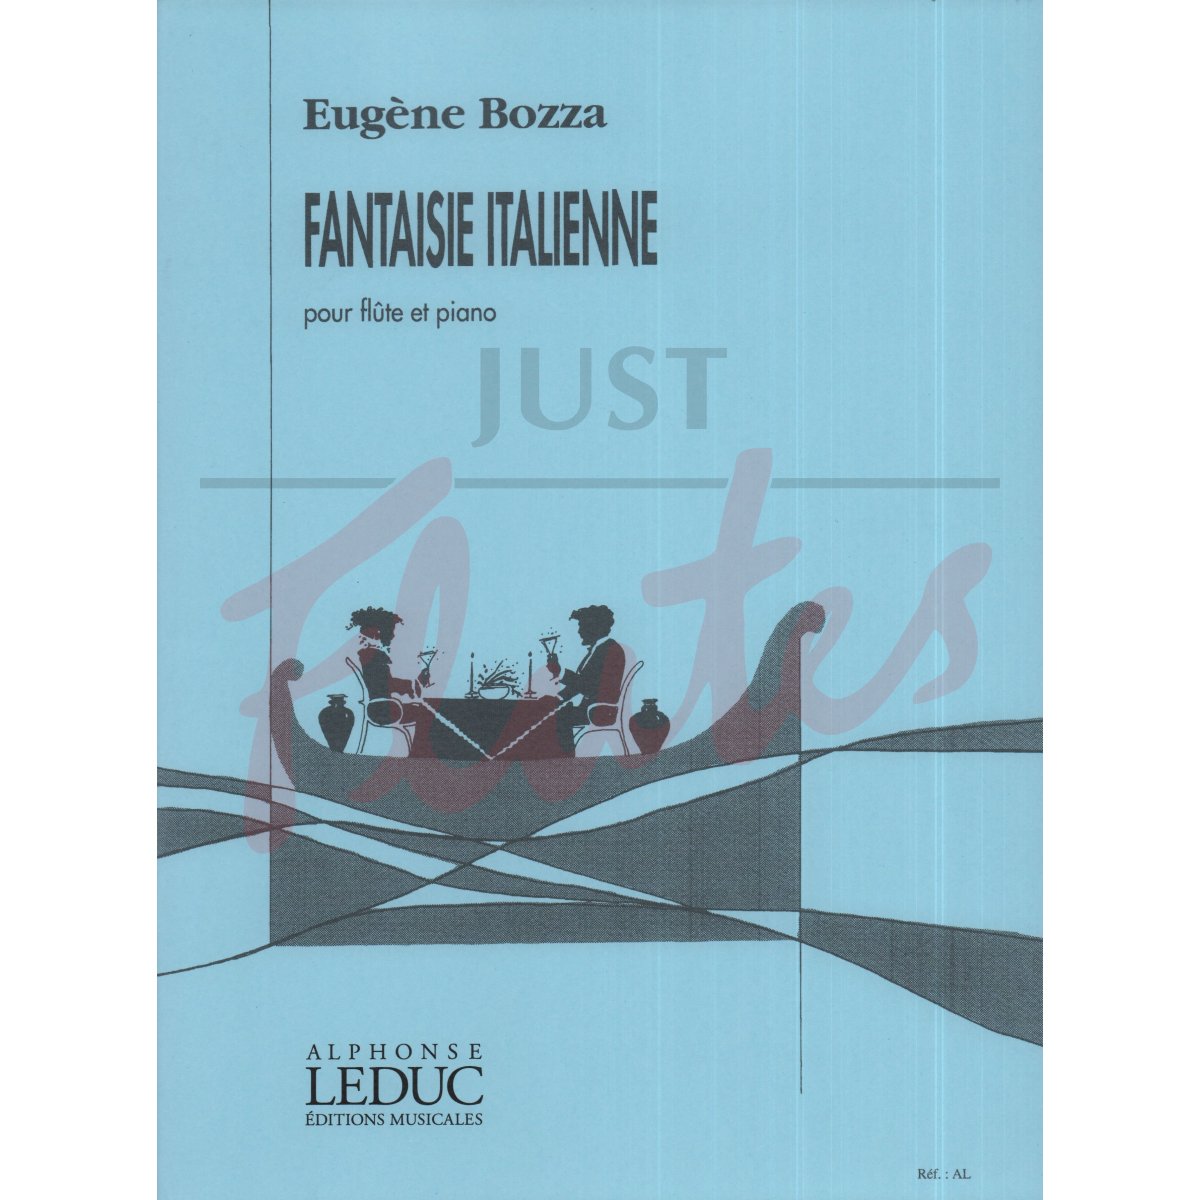 Fantasie Italienne for Flute and Piano